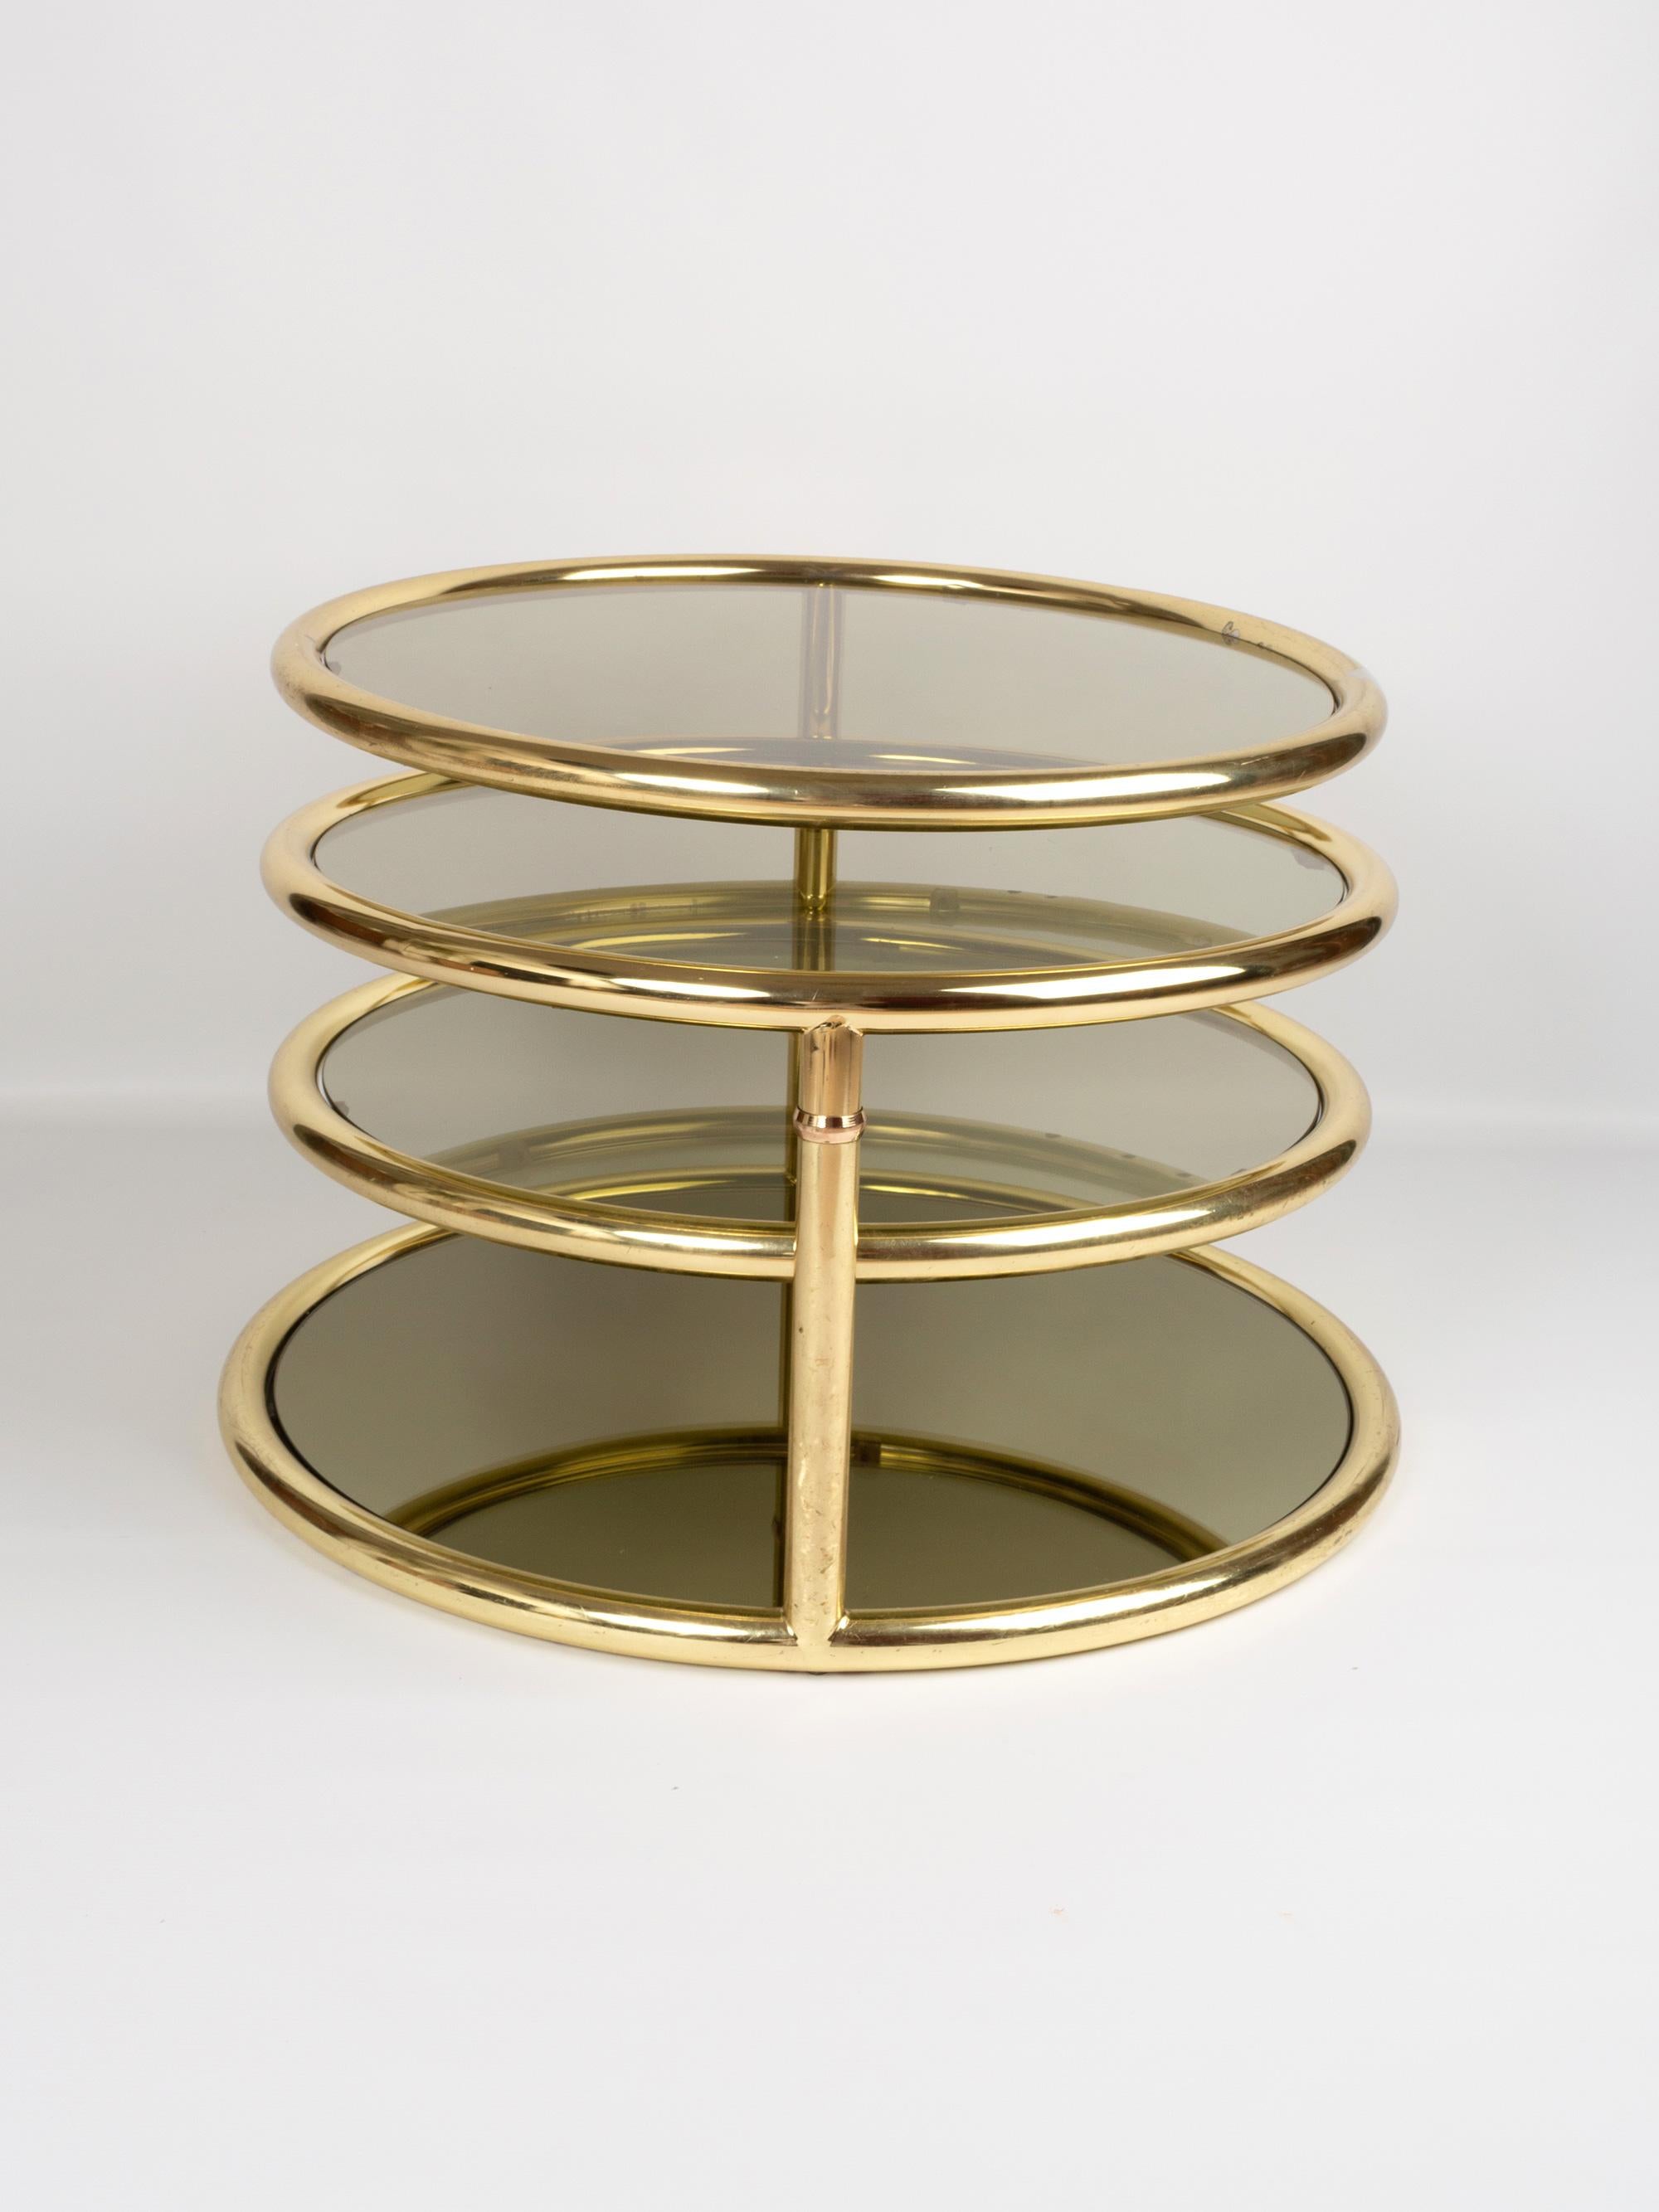 Midcentury Circular Brass Swivel Tiered Coffee Cocktail Table, attributed to DIA For Sale 2